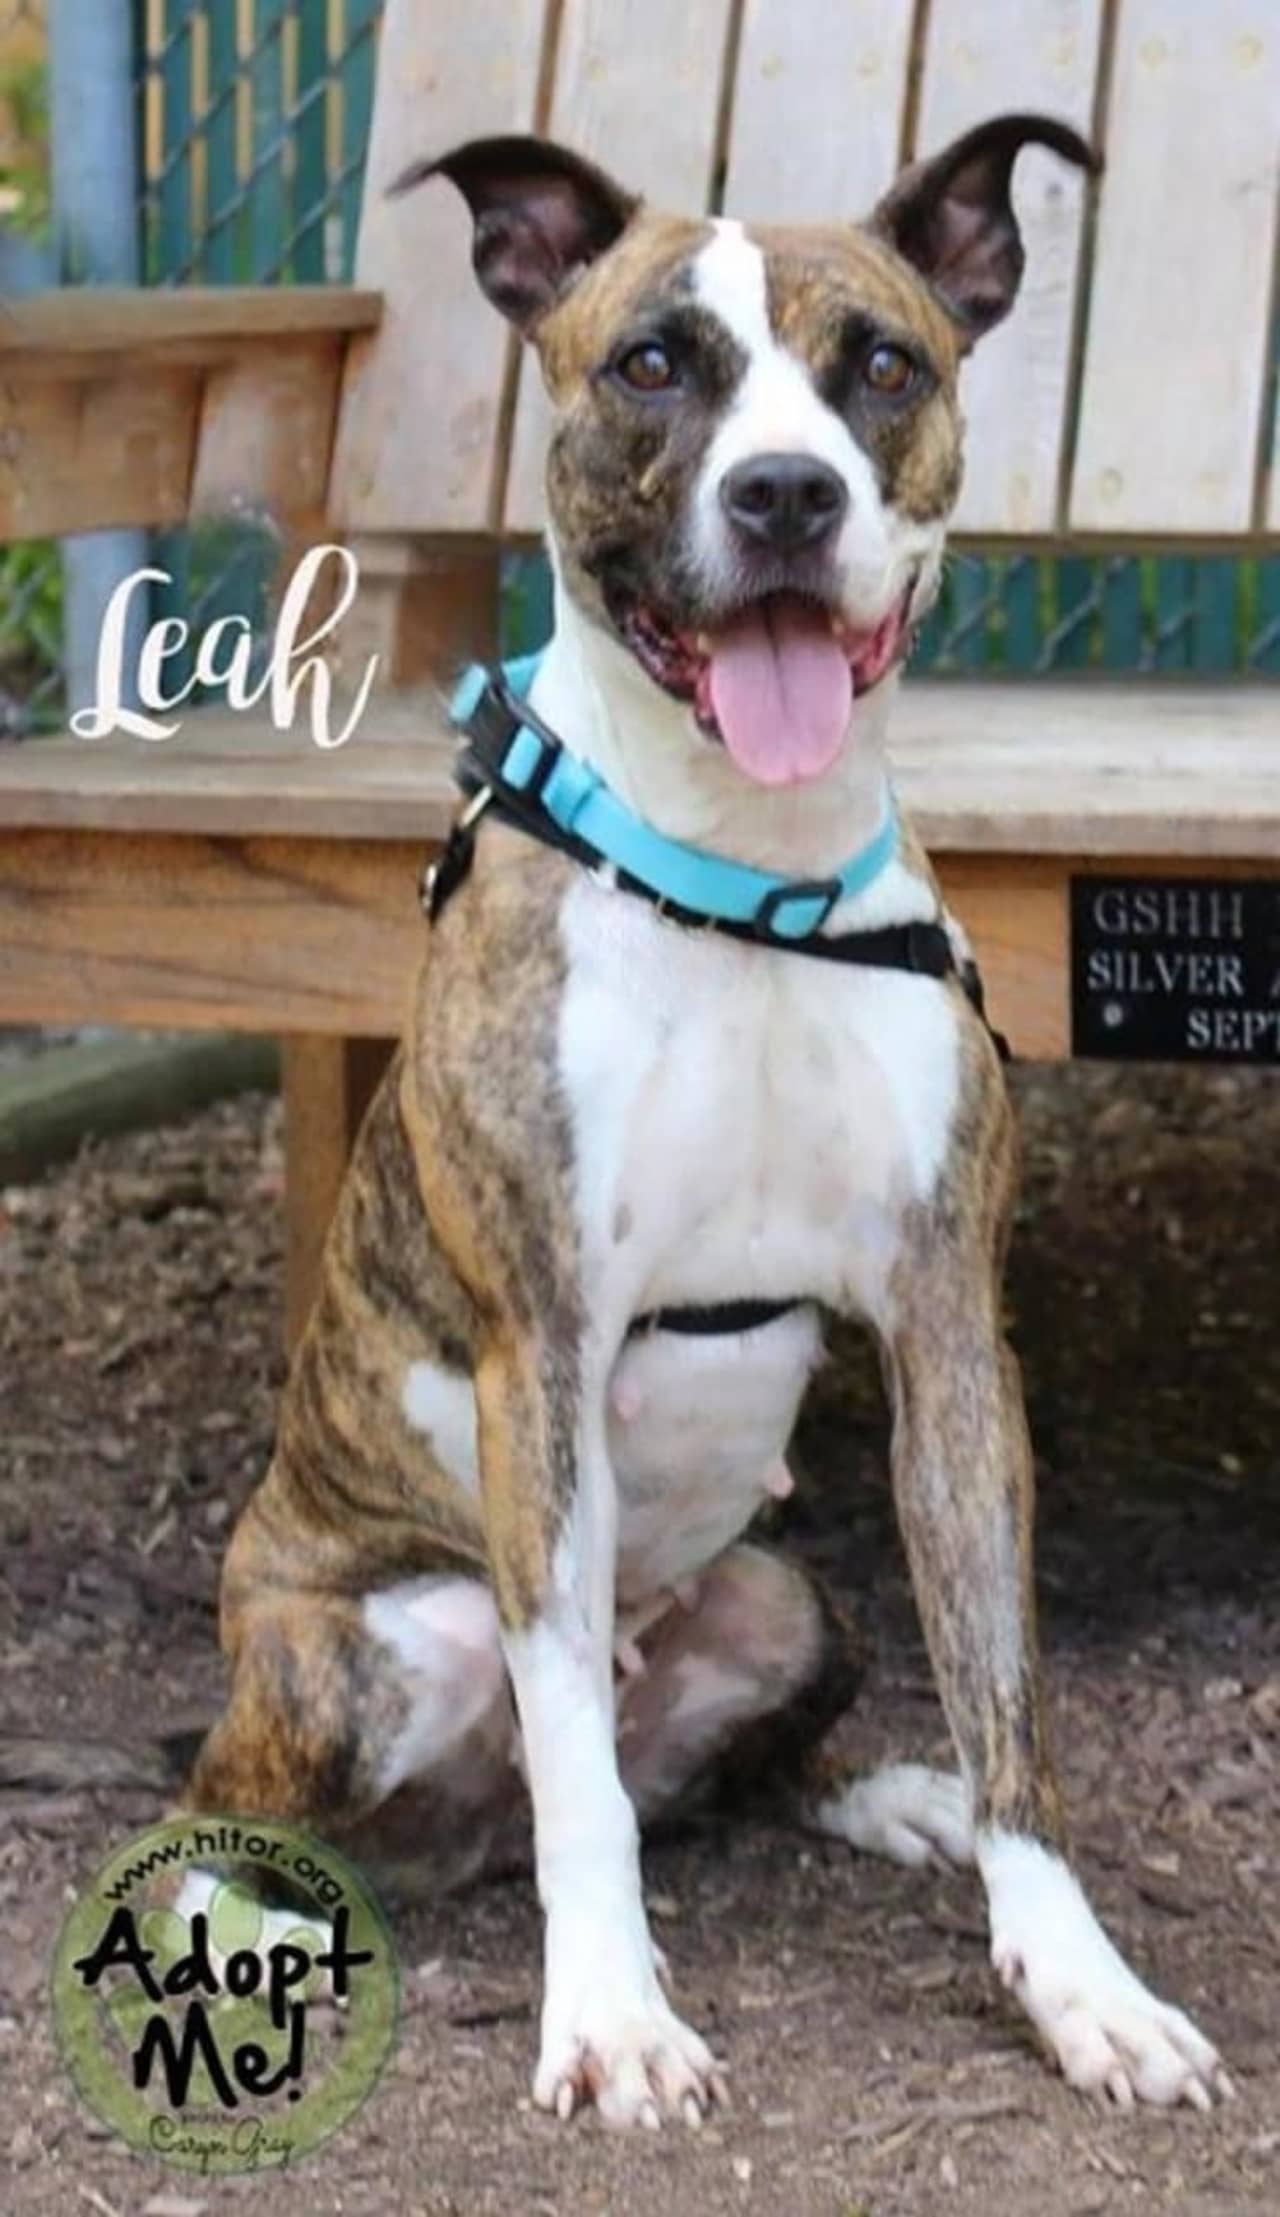 Leah, a terrier mix, is up for adoption at the Hi Tor Animal Shelter in Pomona.